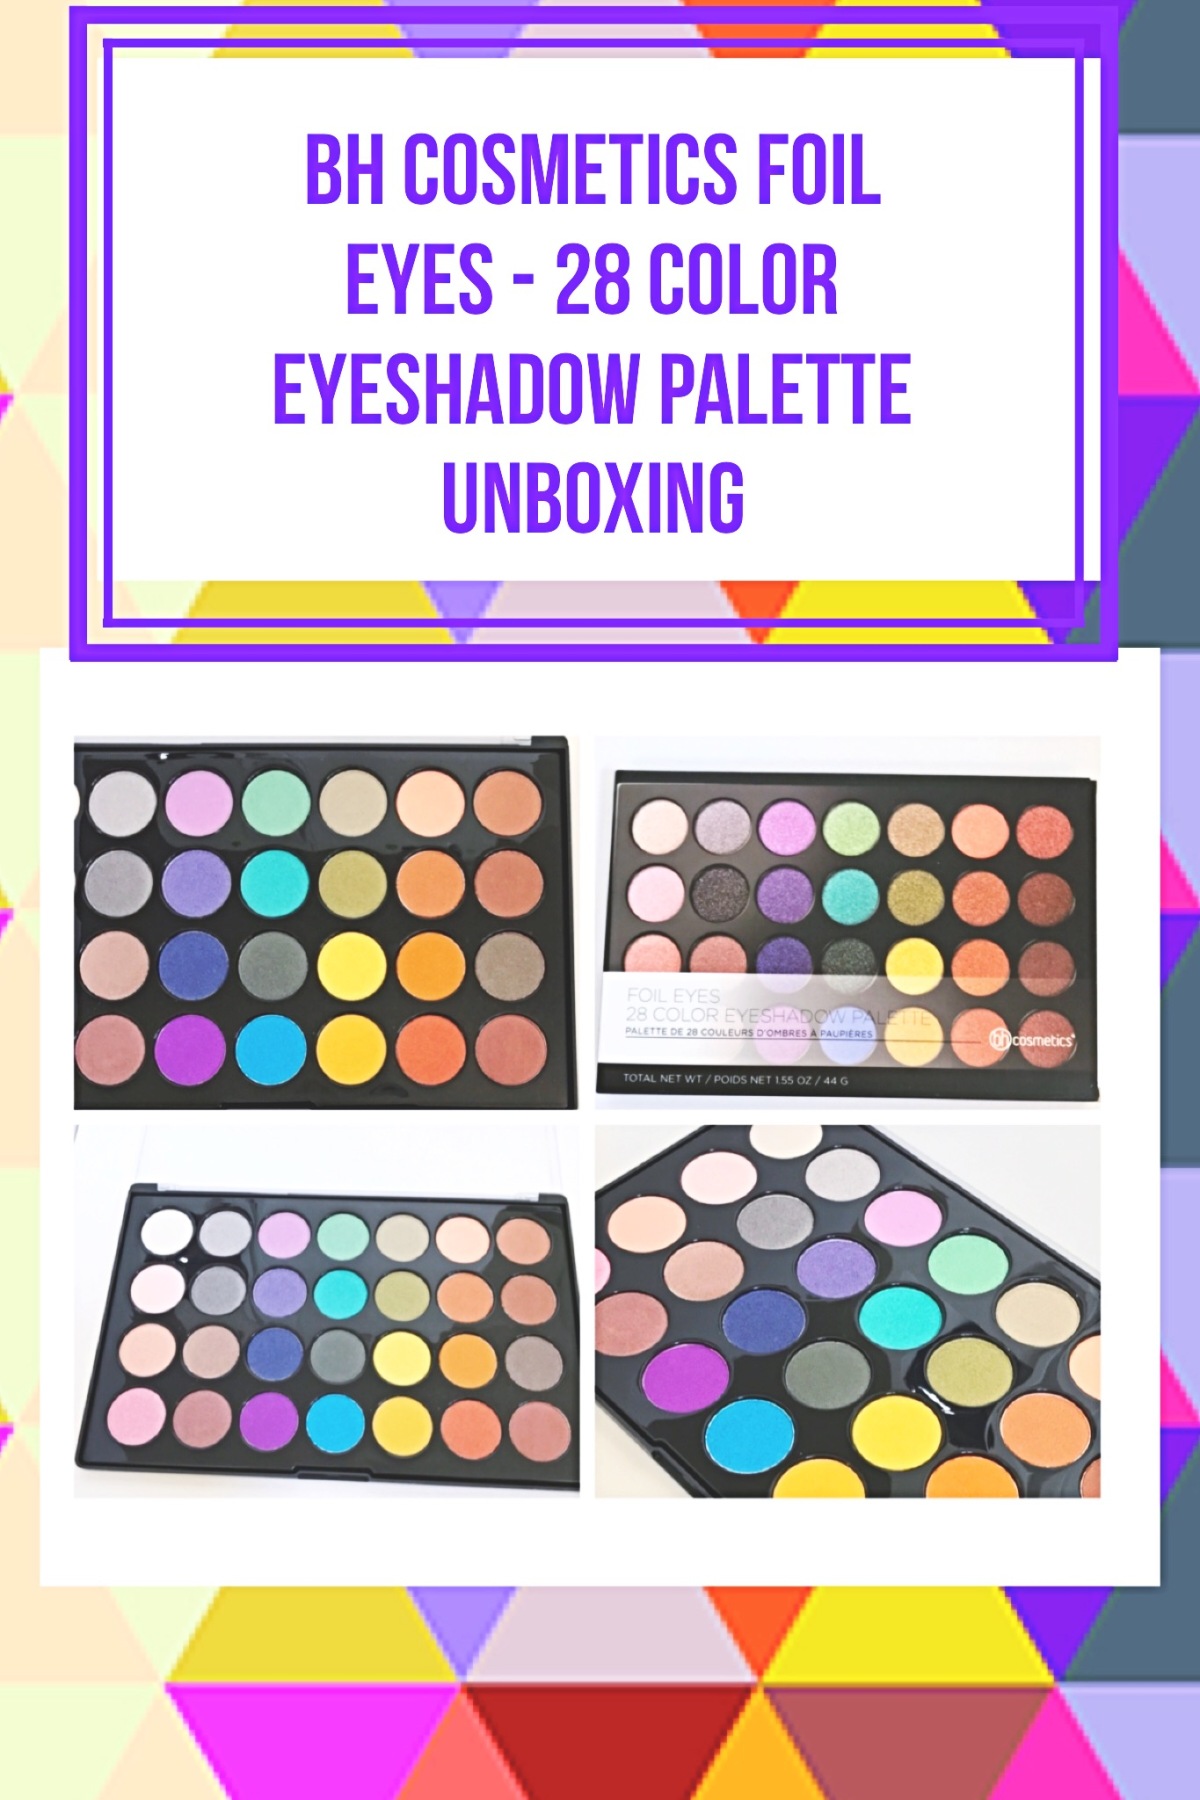 Bh Cosmetics Foil Eyes – 28 Color Eyeshadow Palette Unboxing